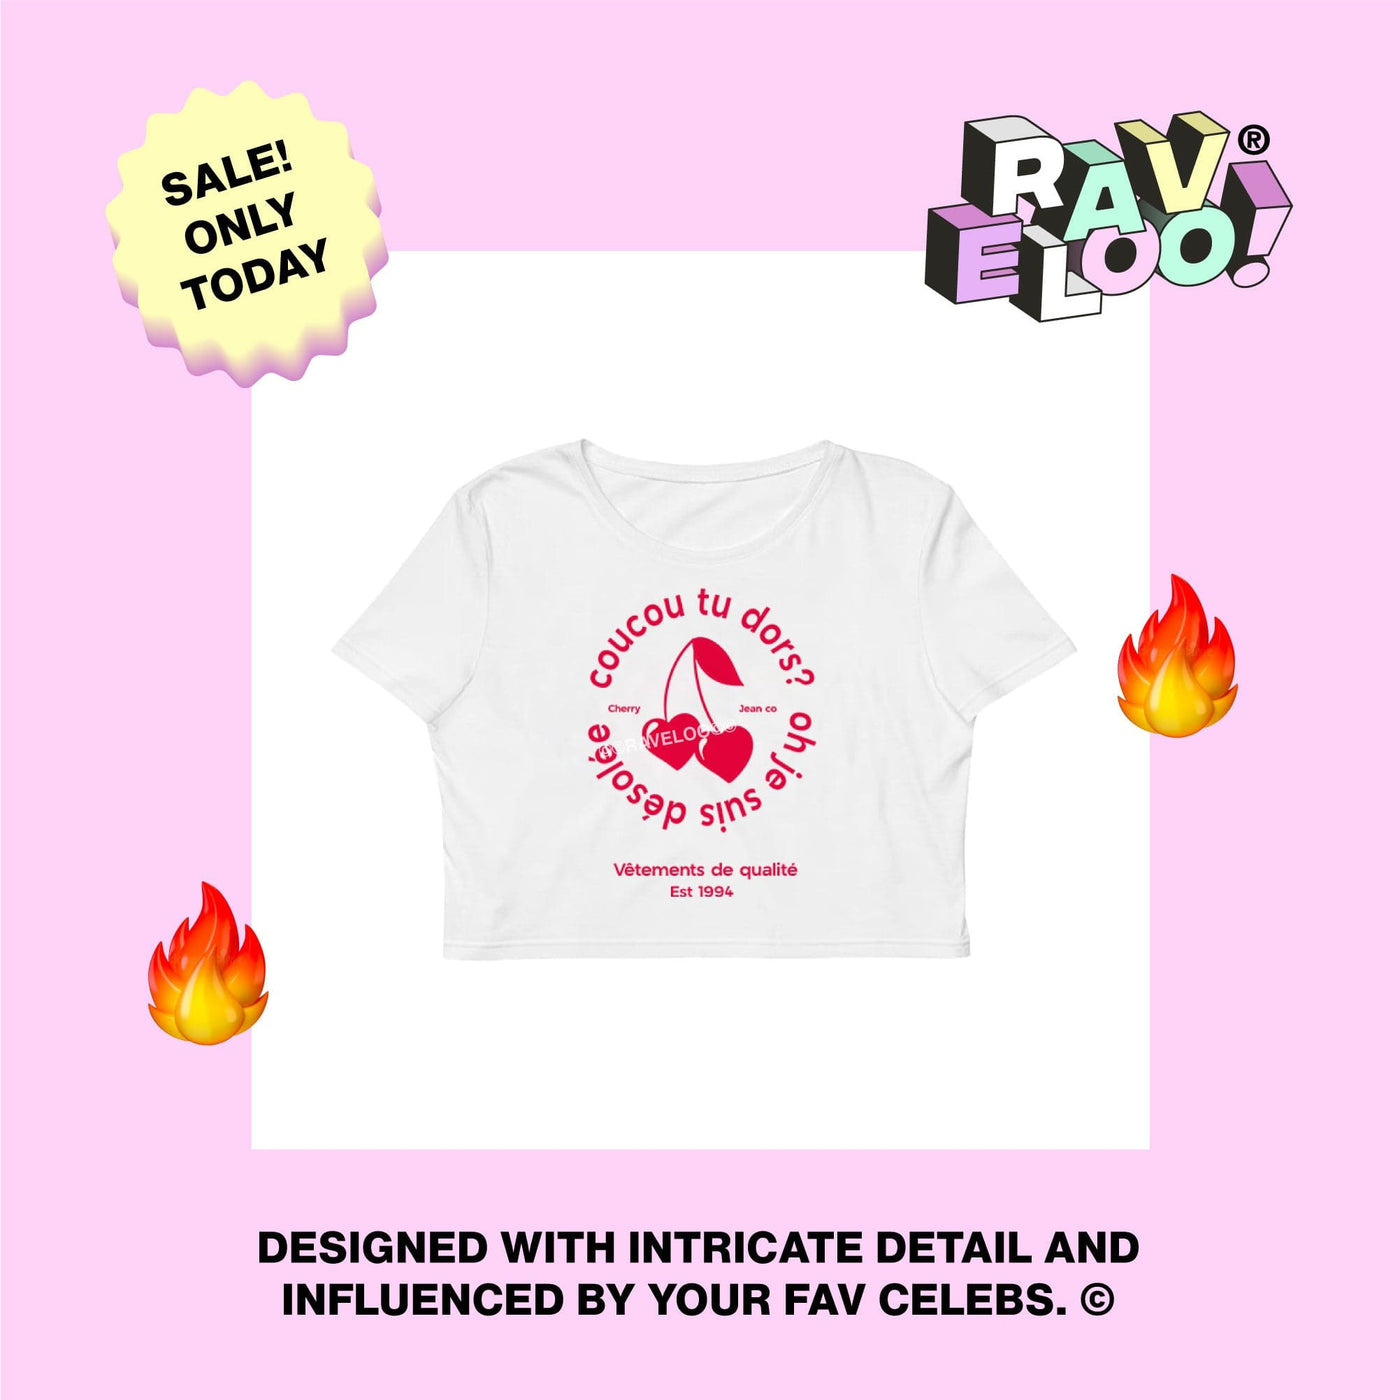 Coucou Cherry Cropped T-Shirt, Retro Cherries Crop Top, crop top, y2k aesthetic, y2k clothes, y2k aesthetic top, collared shirt